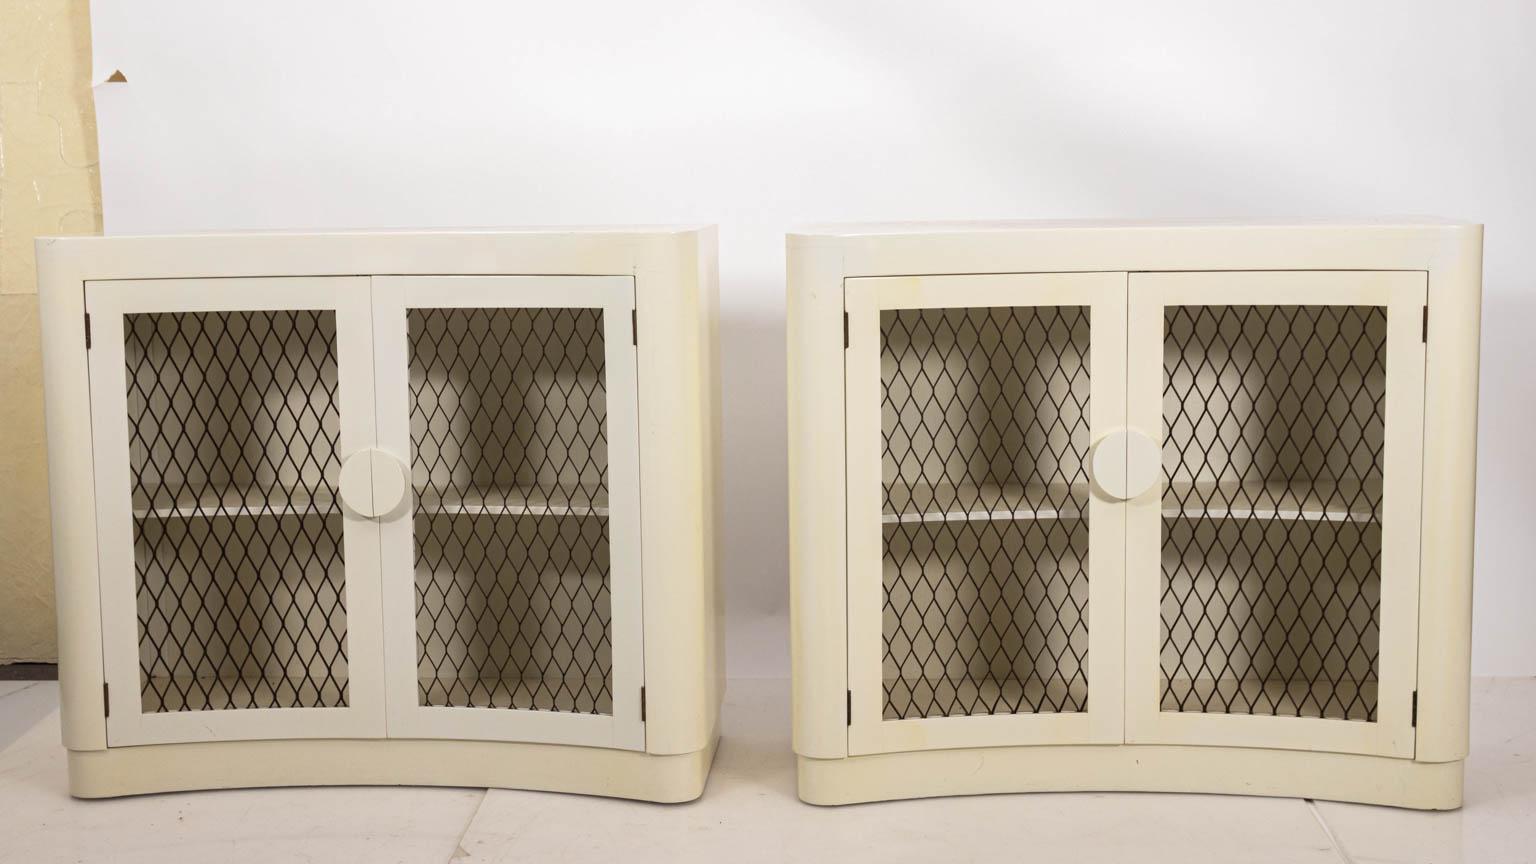 Pair of white lacquered Hollywood Regency style cabinets with metal mesh insert doors, circa 1940s. One shelf is featured on the inside of each piece. Please note of wear consistent with age including cracking and crazing to the finish. Made in the